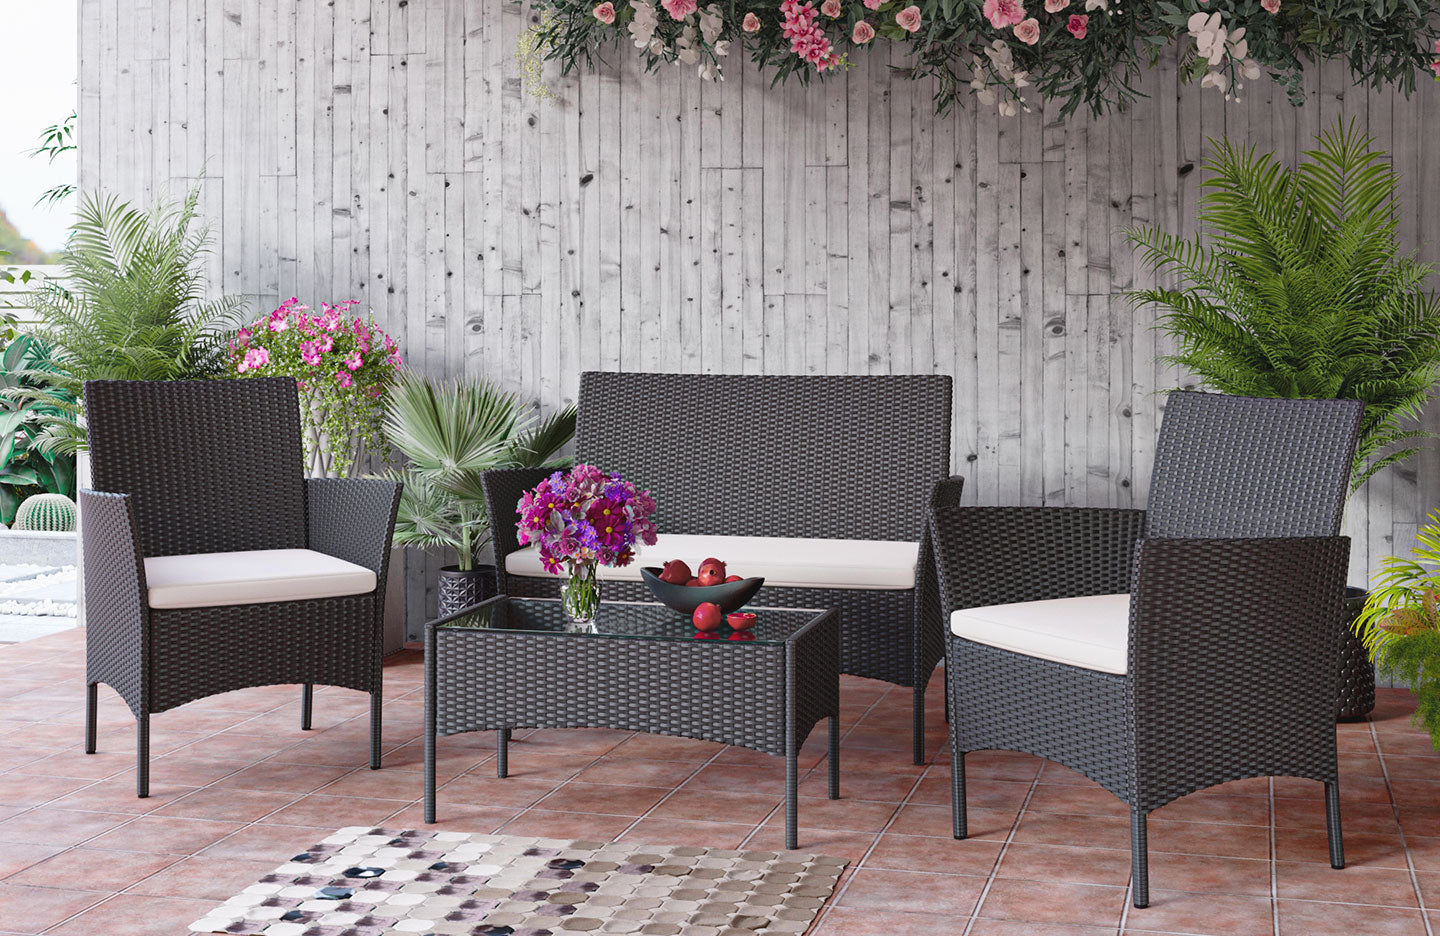 Rattan Garden Furniture 4 Piece Patio Set with 2 Single Chairs, 1 Double Sofa and 1 Table Black